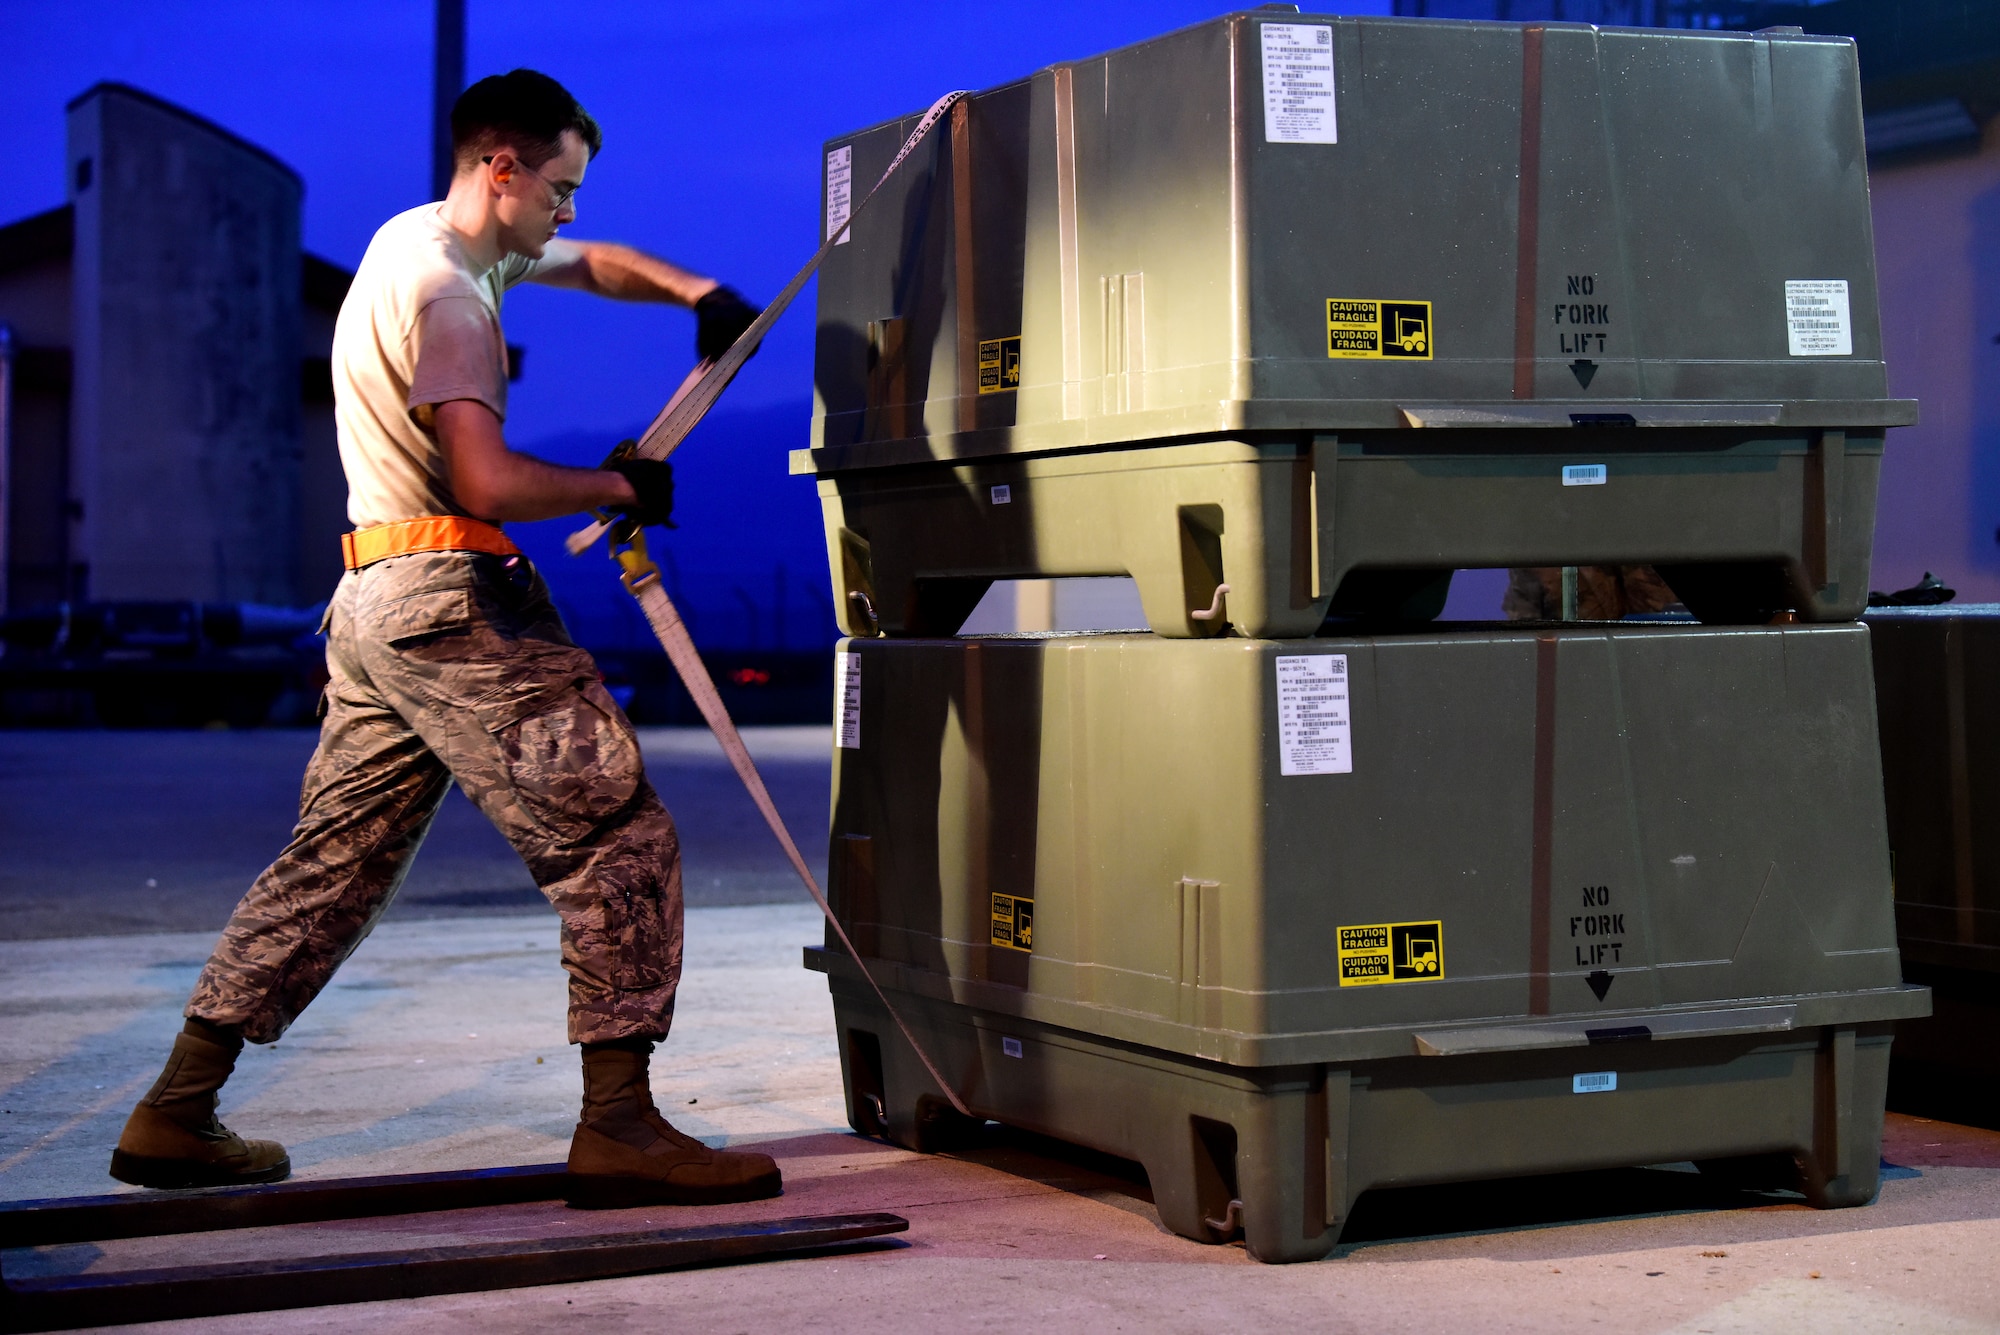 An Airman straps containers together allowing for safe and secure movement of materials during Combat Ammunition Production Exercise 2019 on Aug. 7, 2019, at Aviano Air Base, Italy. Conducting exercises such as CAPEX enables Airmen to learn in a controlled environment, bolstering unit interoperability and refining their practice. (U.S. Air Force photo by Airman 1st Class Caleb House)